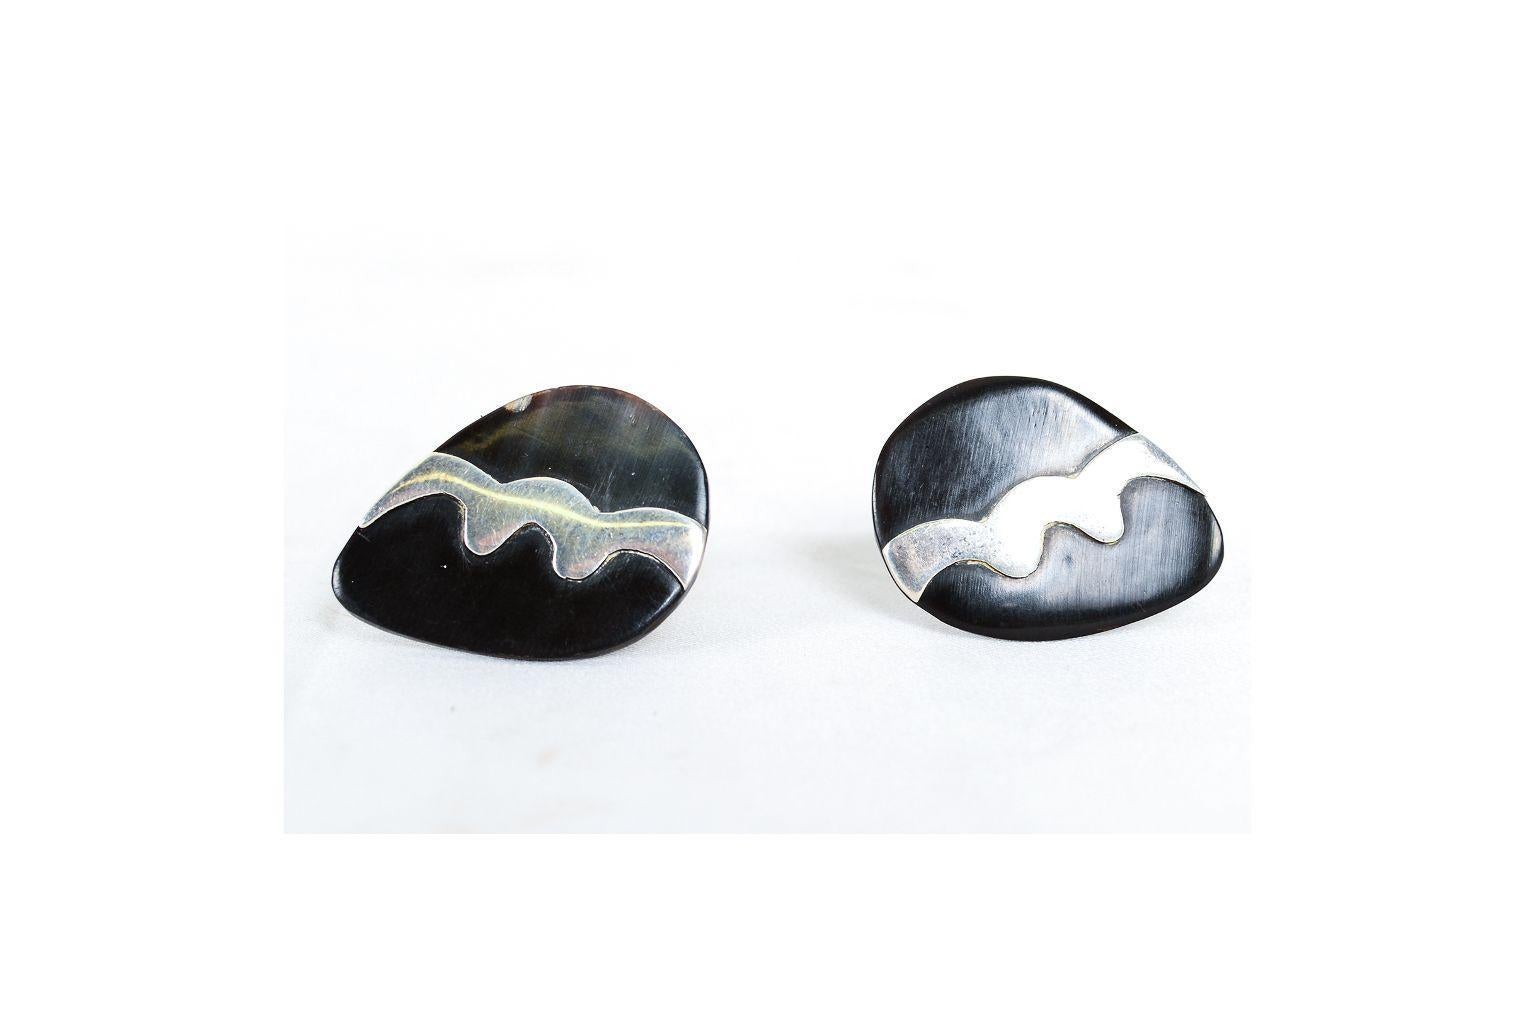 Beautiful pair of matching cufflinks made of free form onyx and sterling silver. Stamped .925 sterling TAXCO, Initials CD. Wonderful original vintage condition. A modernist design, ready to go. Measures: H 0.5 in. x W 0.88 in. x D 1.13 in. Preowned